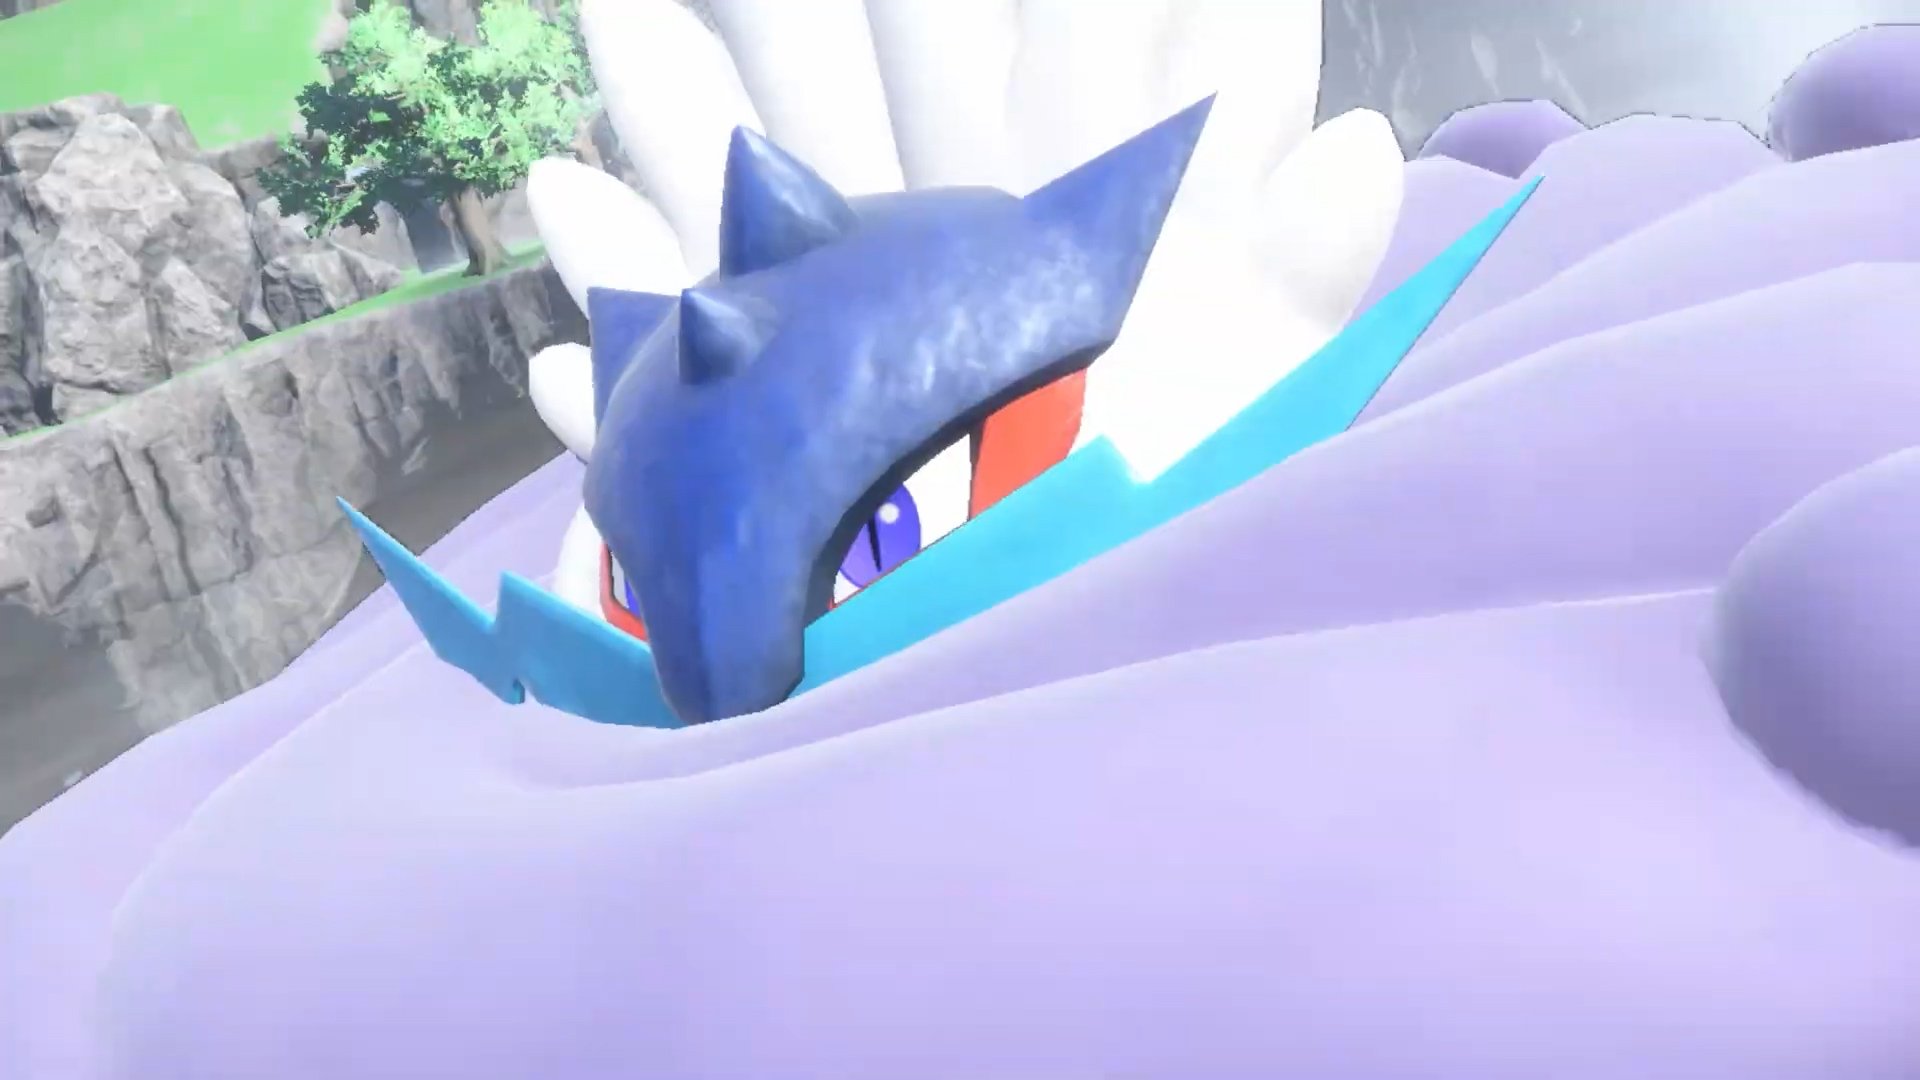 Pokemon Sword and Shield: What are the version exclusives this time around?